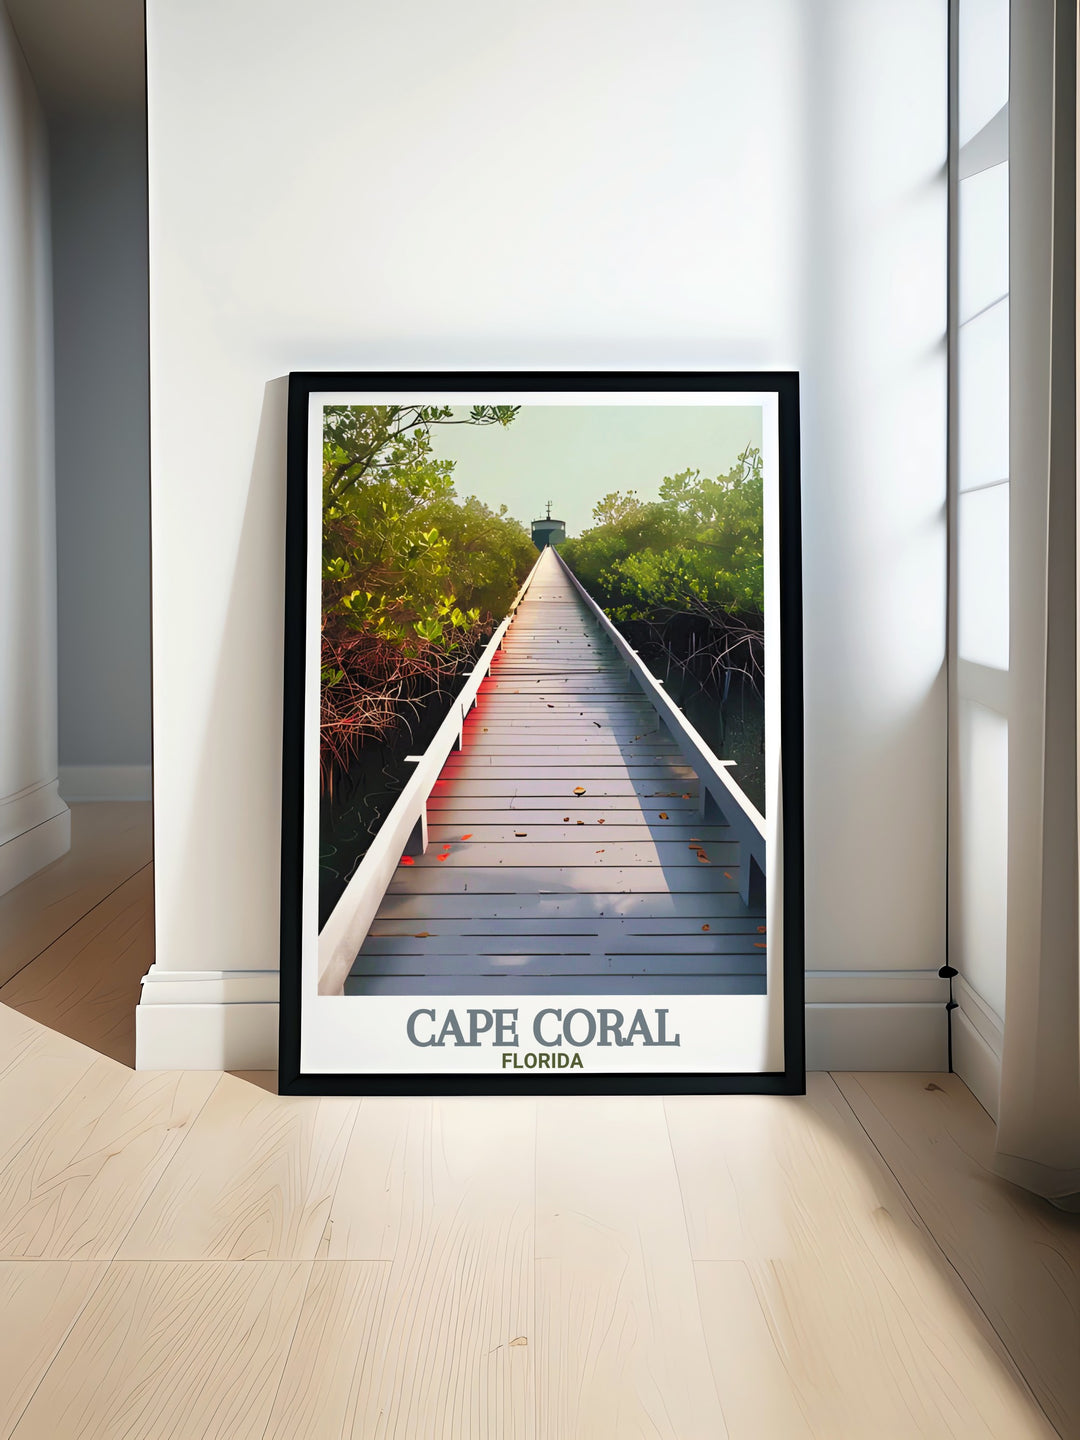 Cape Coral Print featuring Glover Bight Trail vibrant Florida travel poster showcasing the natural beauty of Cape Coral with intricate details perfect for home decor and gifts ideal for nature enthusiasts and art lovers.